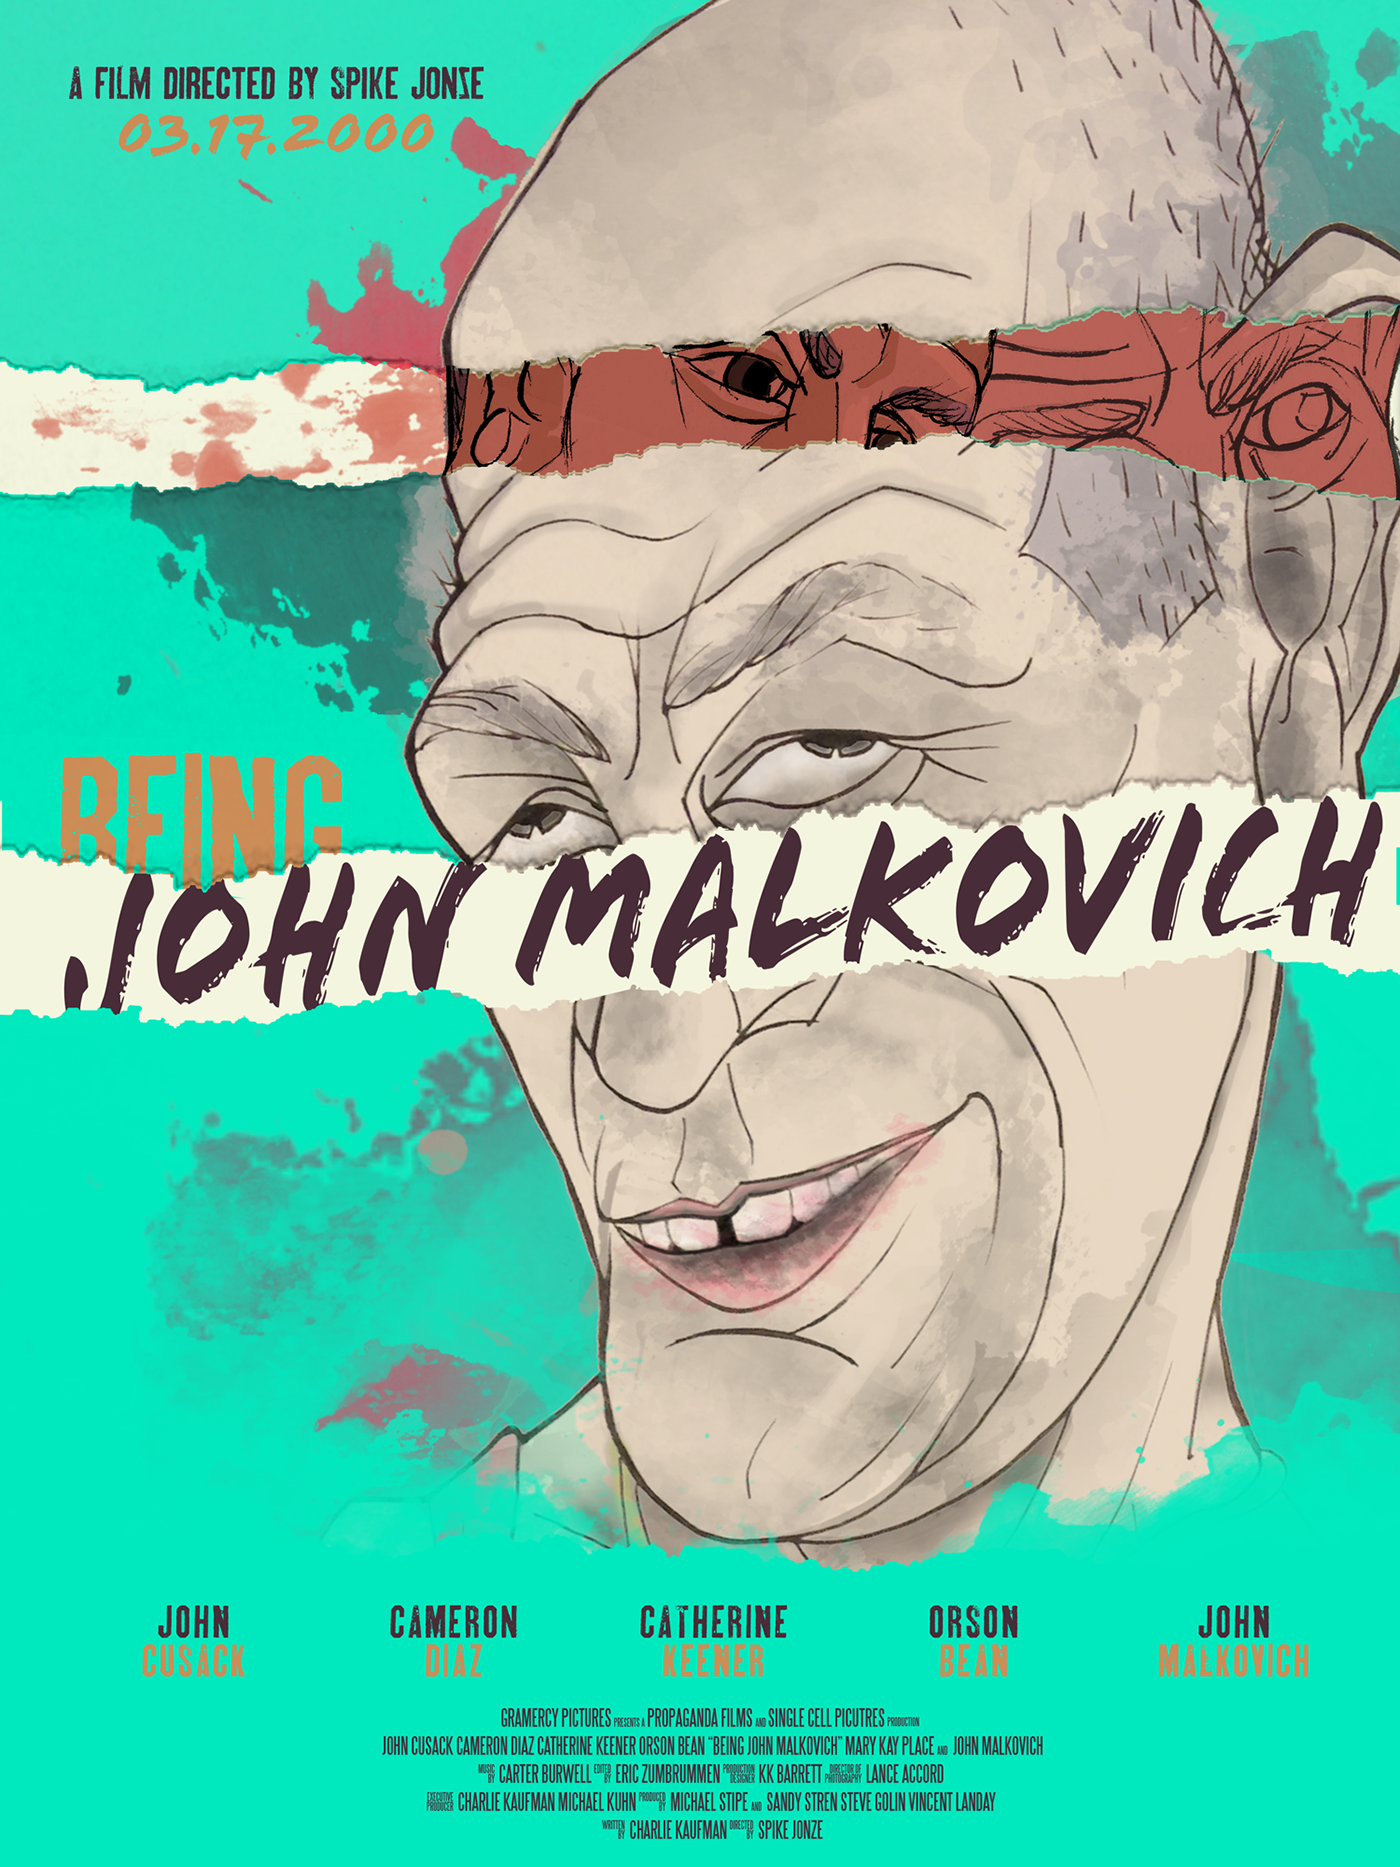 motion graphics titles being john malkovich umsl Nick mantia poster bluray DVD case cover puppet